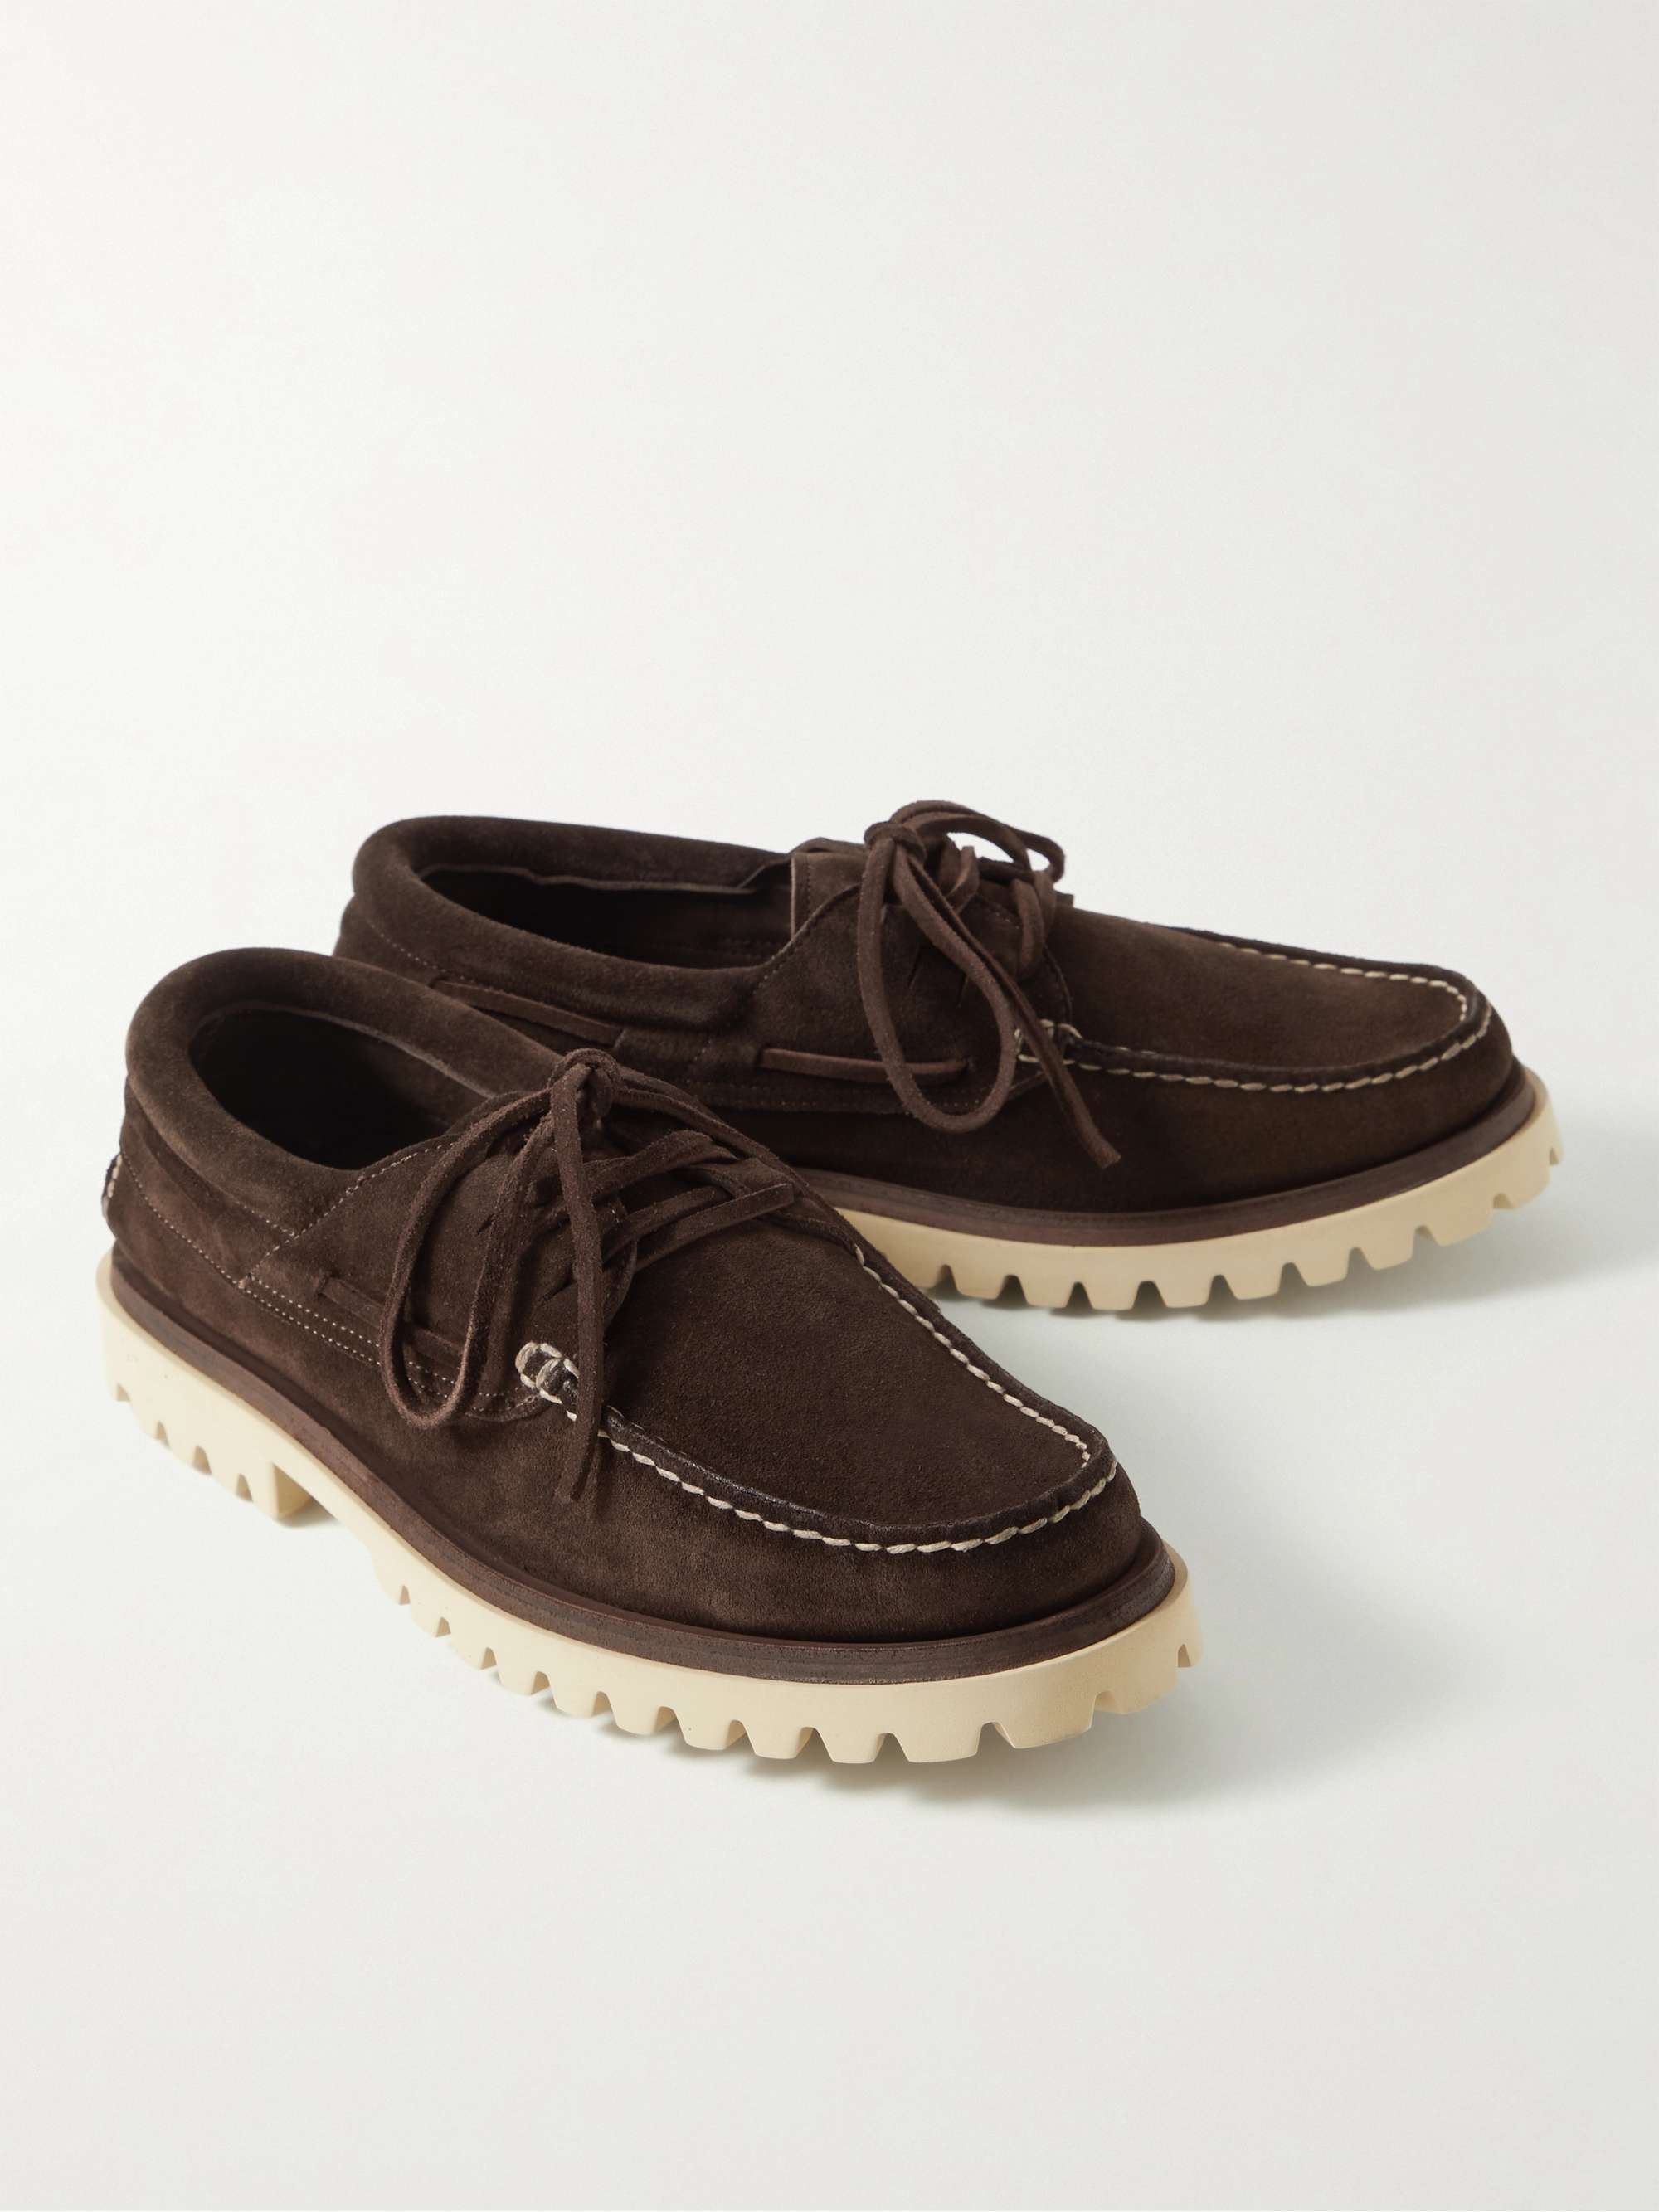 OFFICINE CREATIVE Heritage Suede Boat Shoes